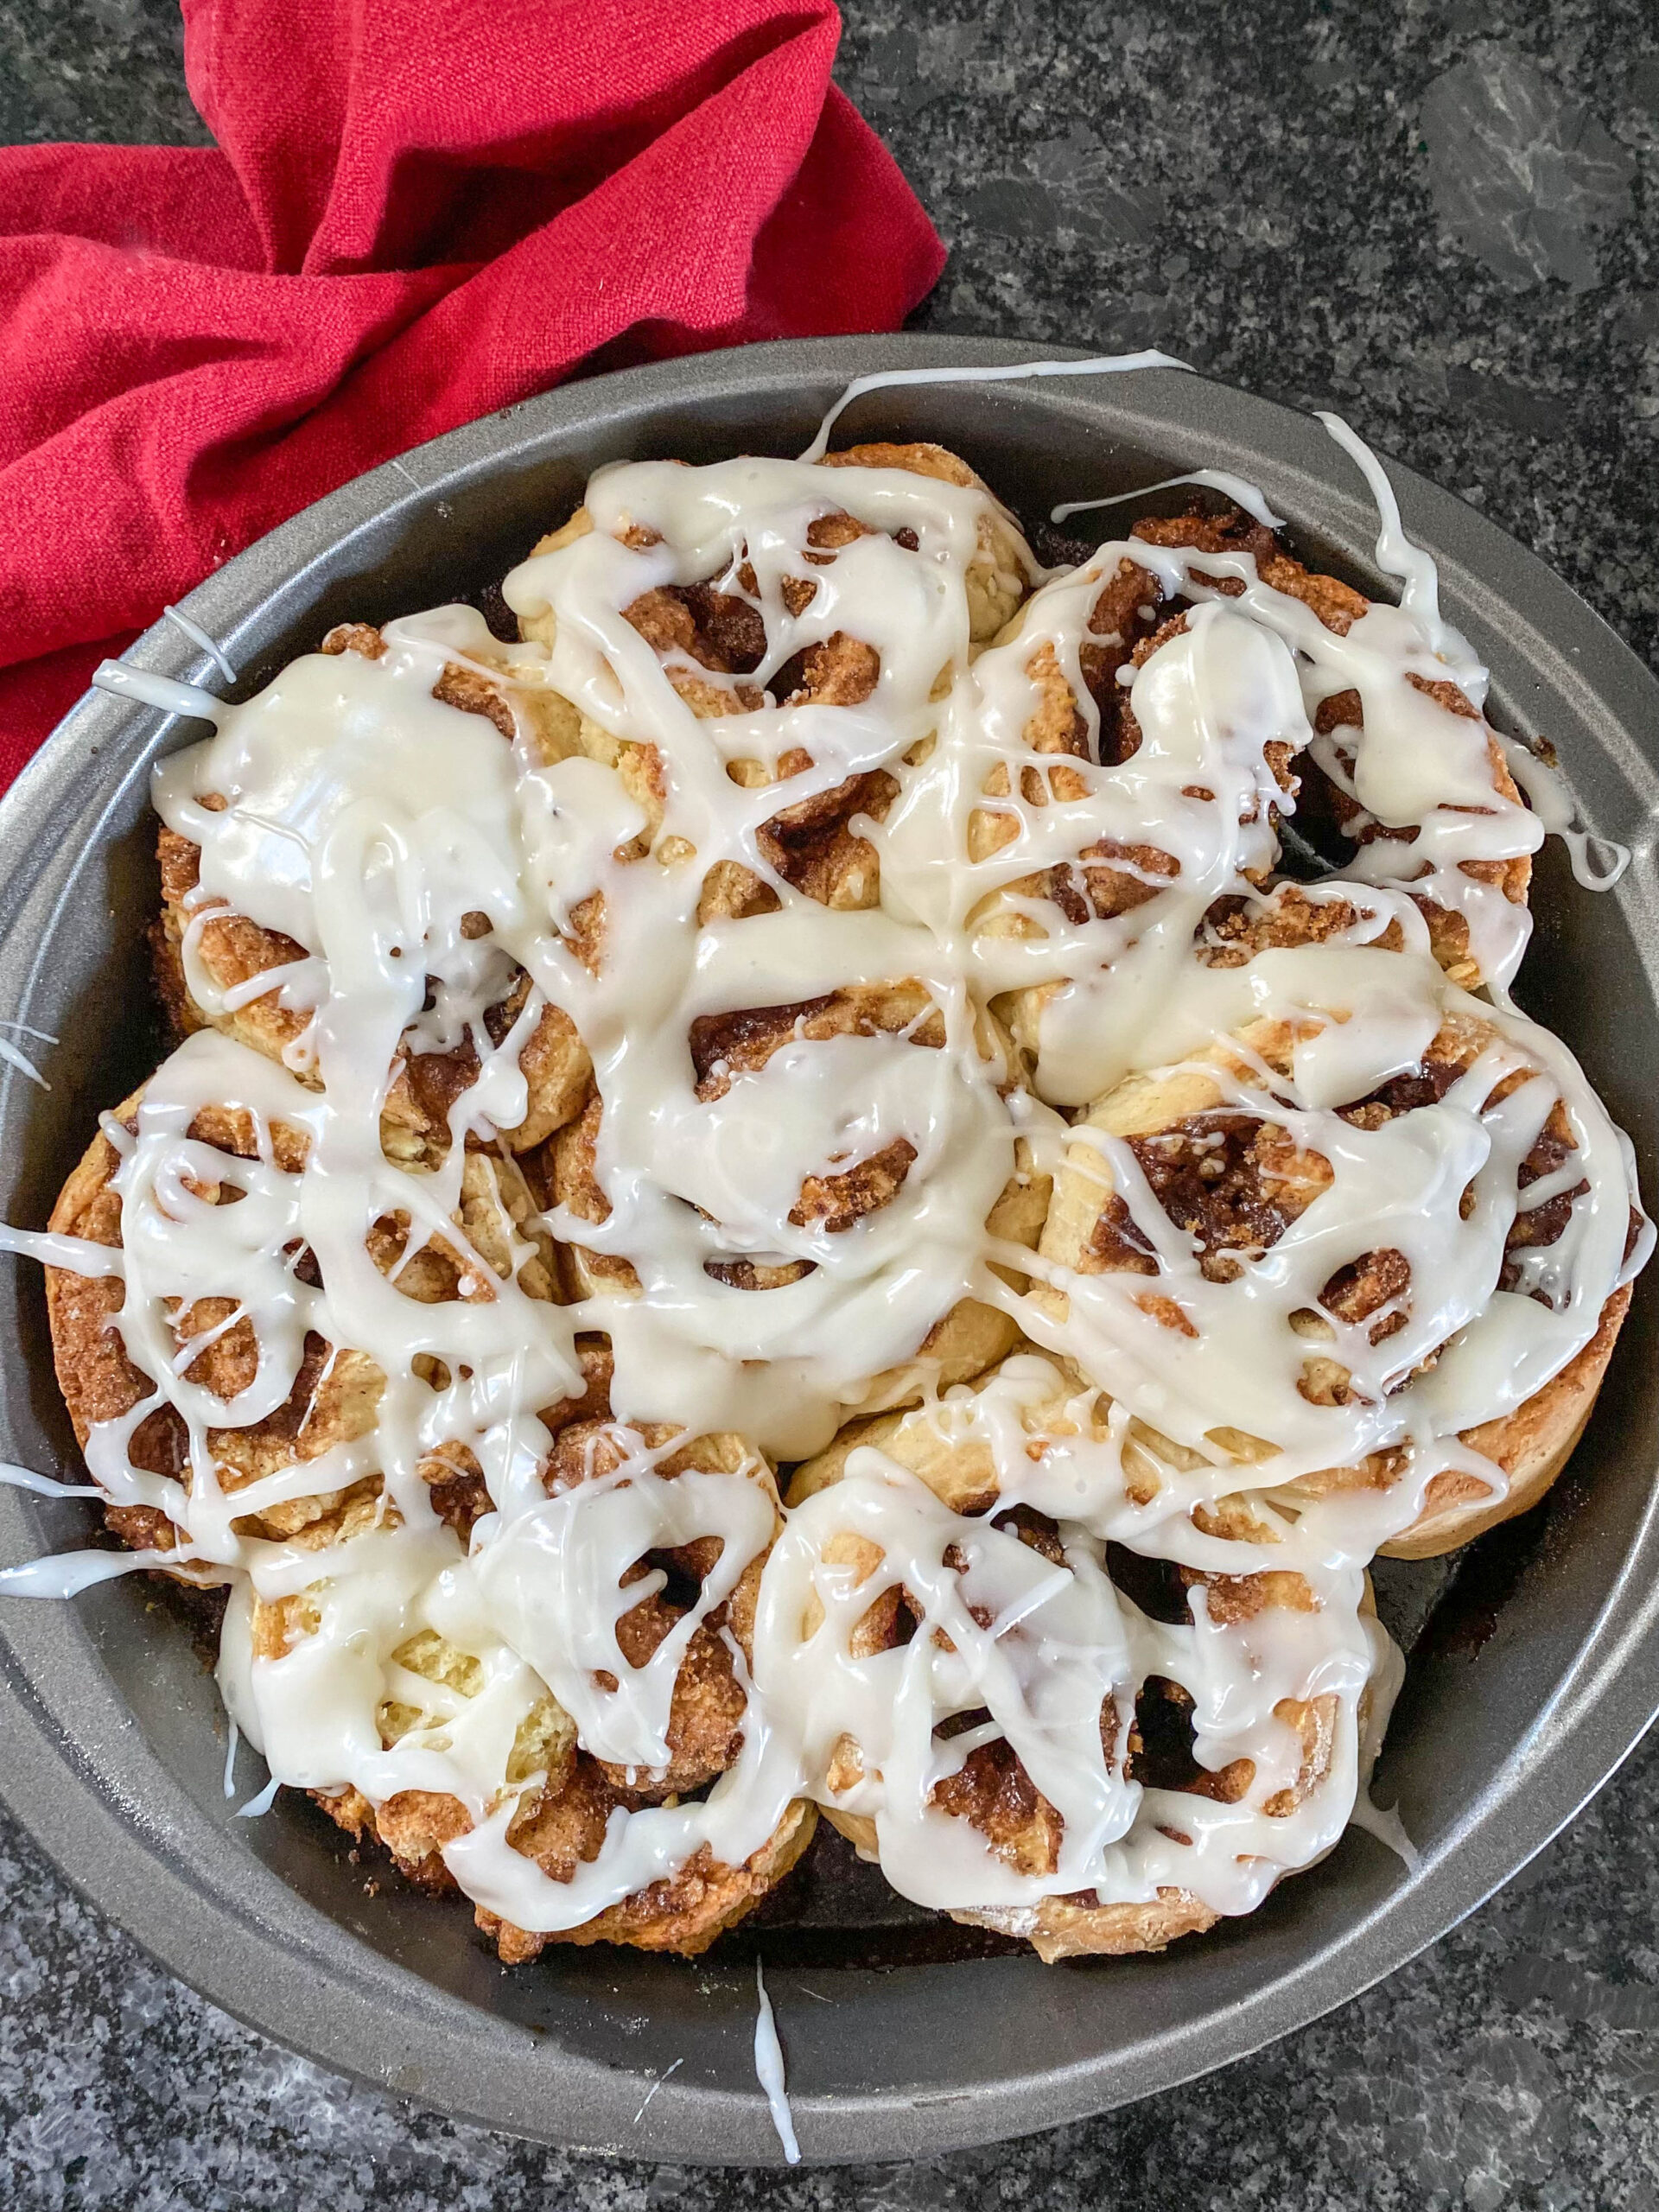 Easy, Kid-Friendly Cinnamon Rolls are fun to make with kids (or not!) and make a fabulous morning treat!